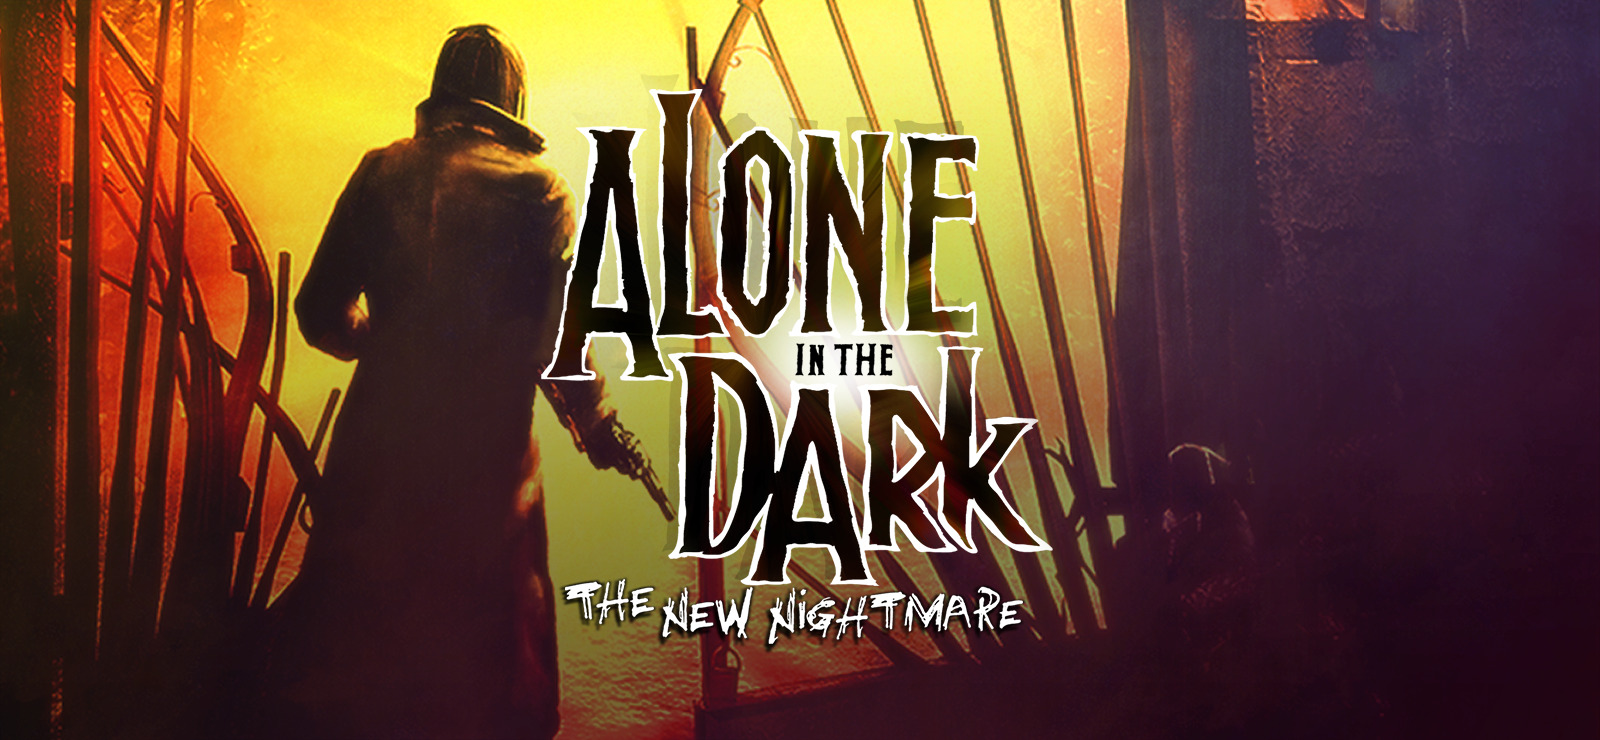 75% Alone in the Dark: The New Nightmare on